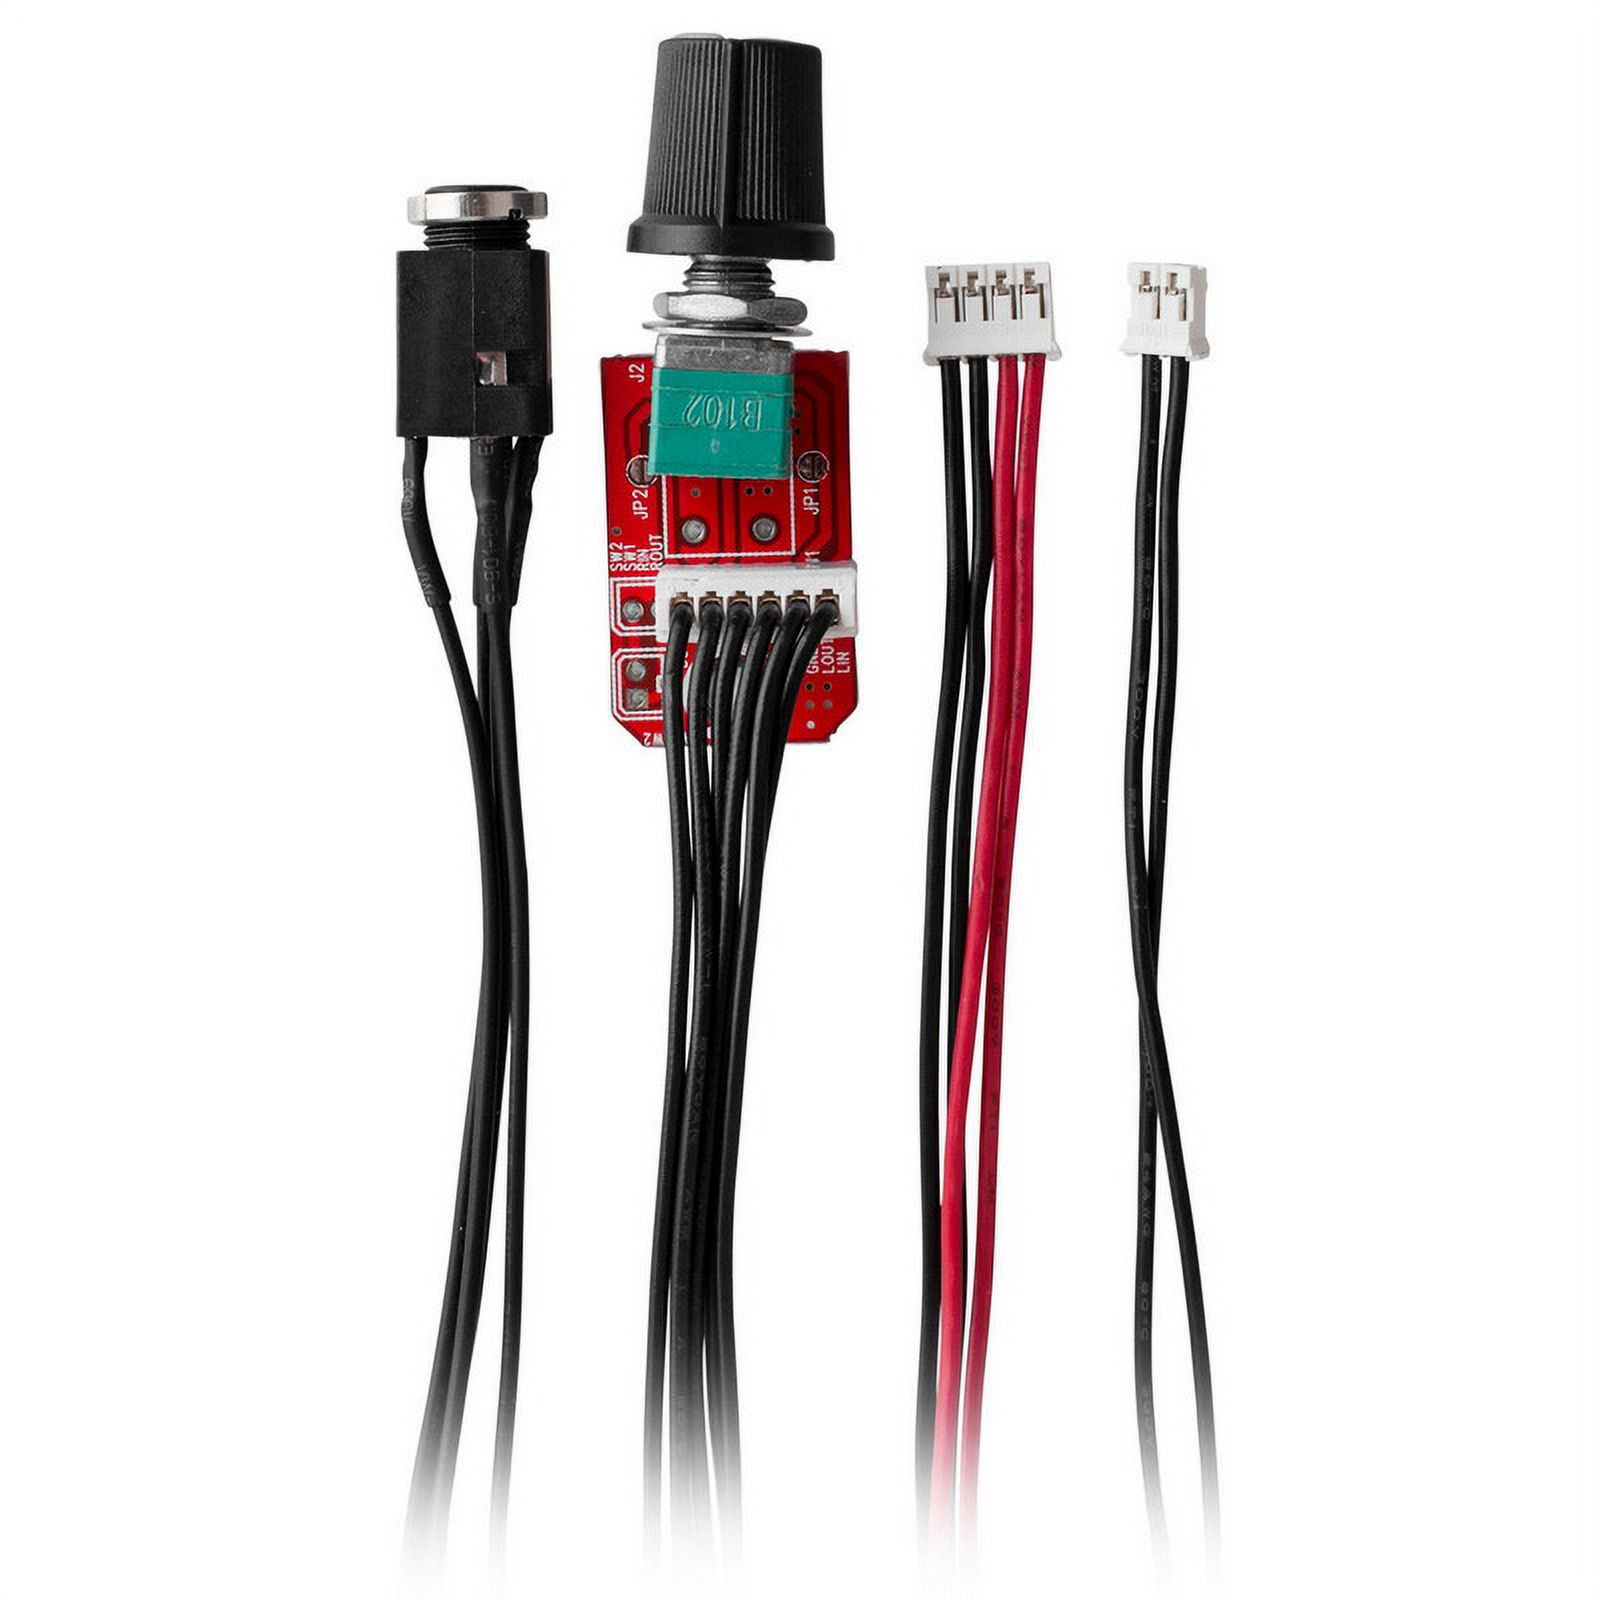 Dayton Audio KAB-FC Function Cables Package for Bluetooth Amplifier Boards - image 1 of 2